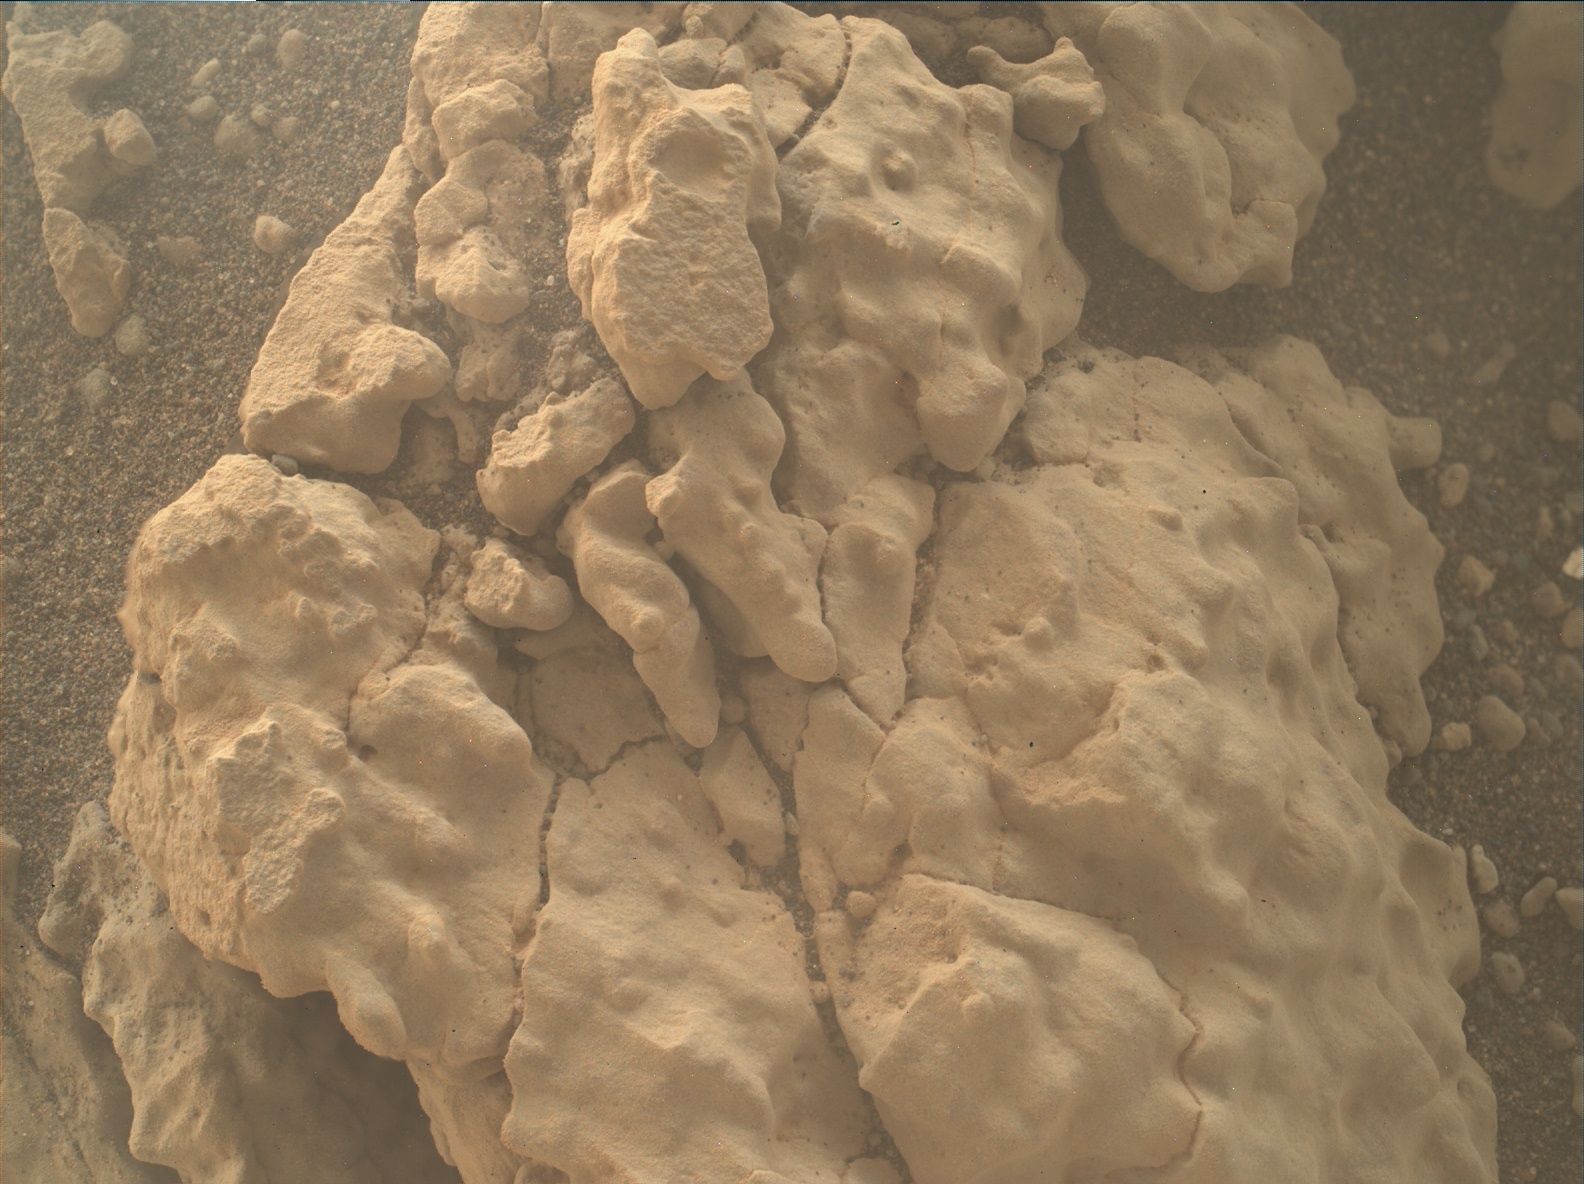 Nasa's Mars rover Curiosity acquired this image using its Mars Hand Lens Imager (MAHLI) on Sol 2654